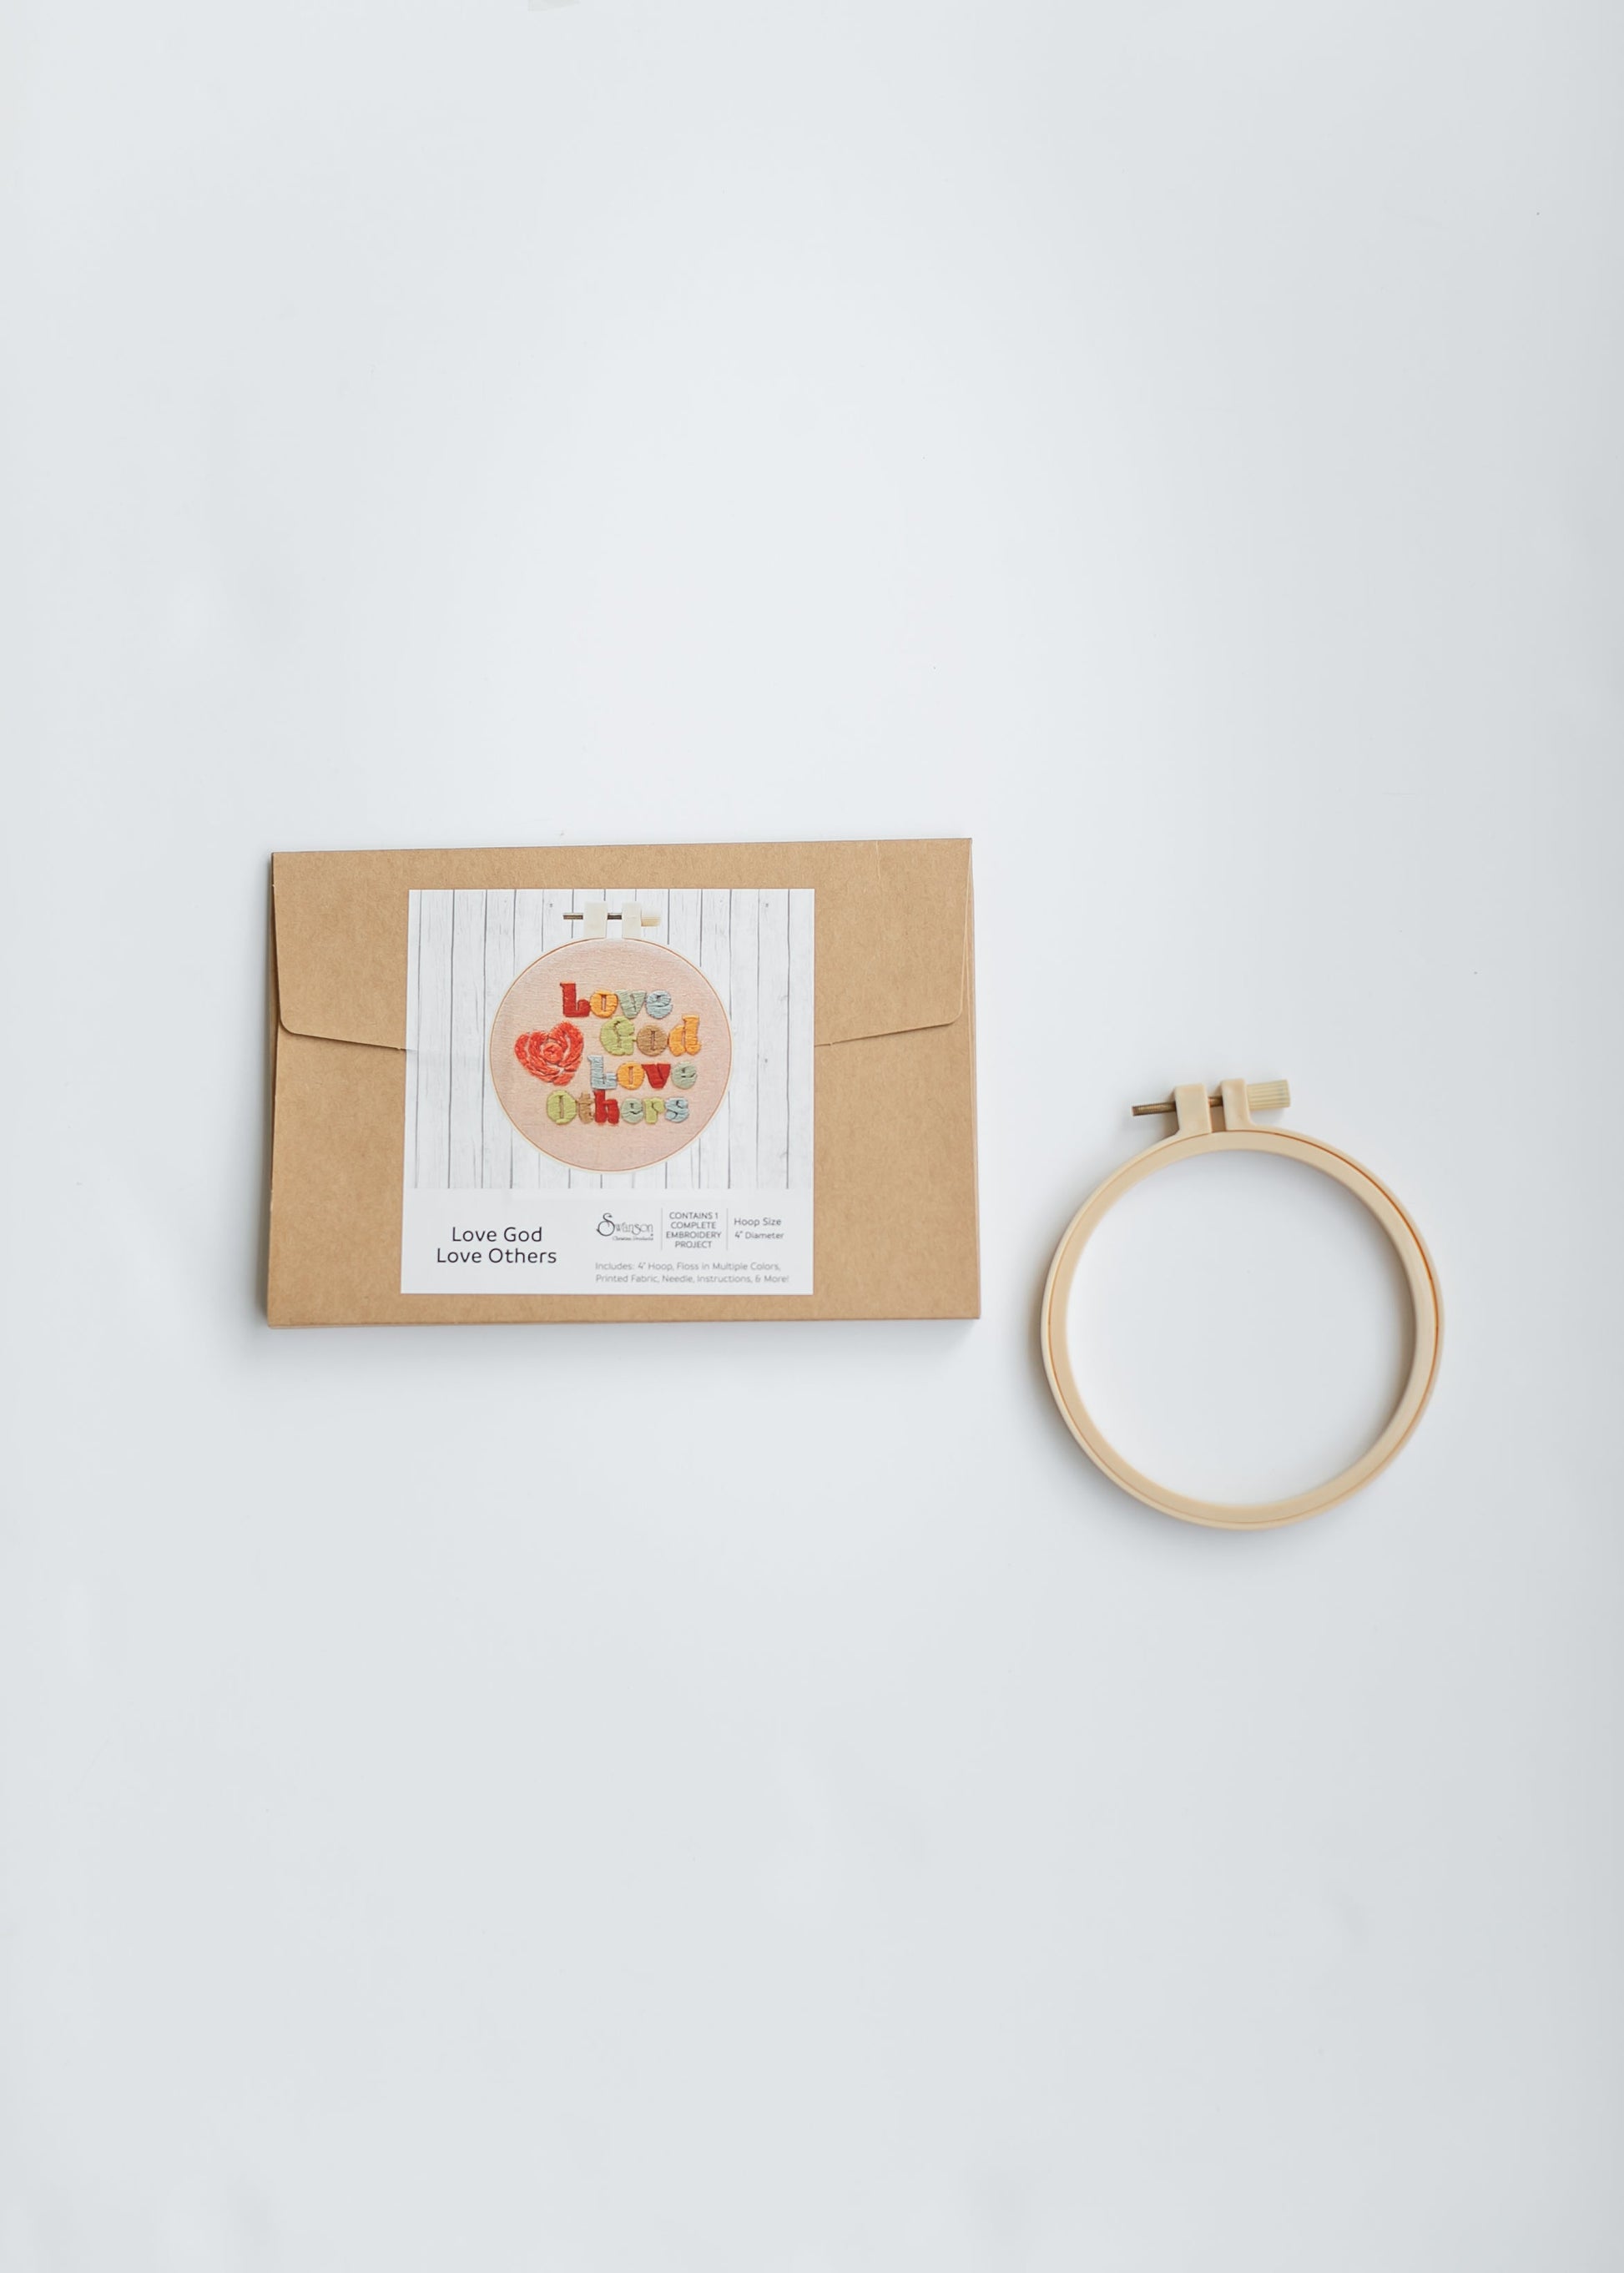 Embroidery Hoop Kit Gifts